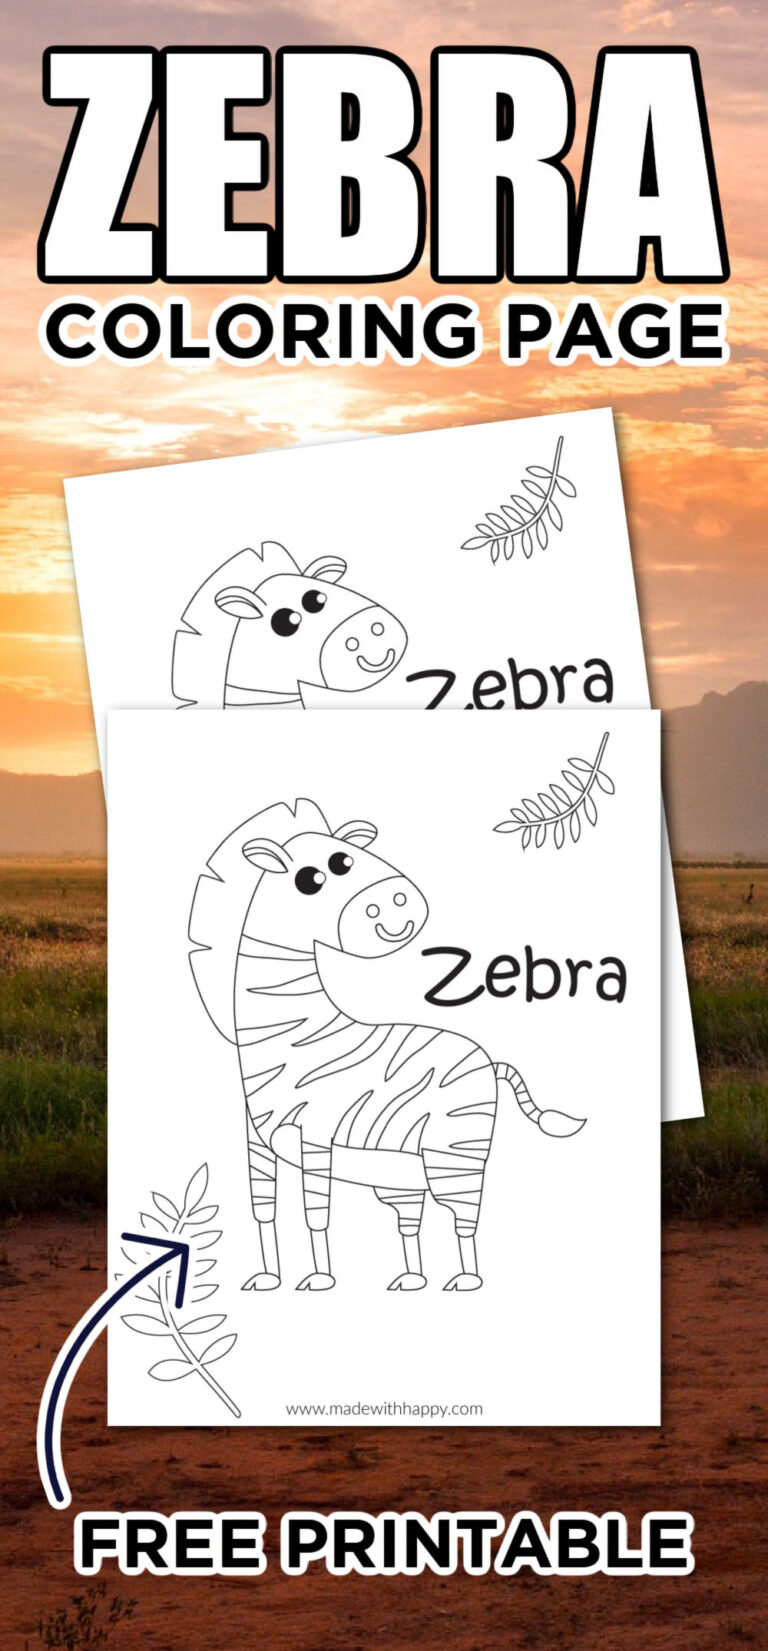 Free Printable Zebra Coloring Page - Made with HAPPY